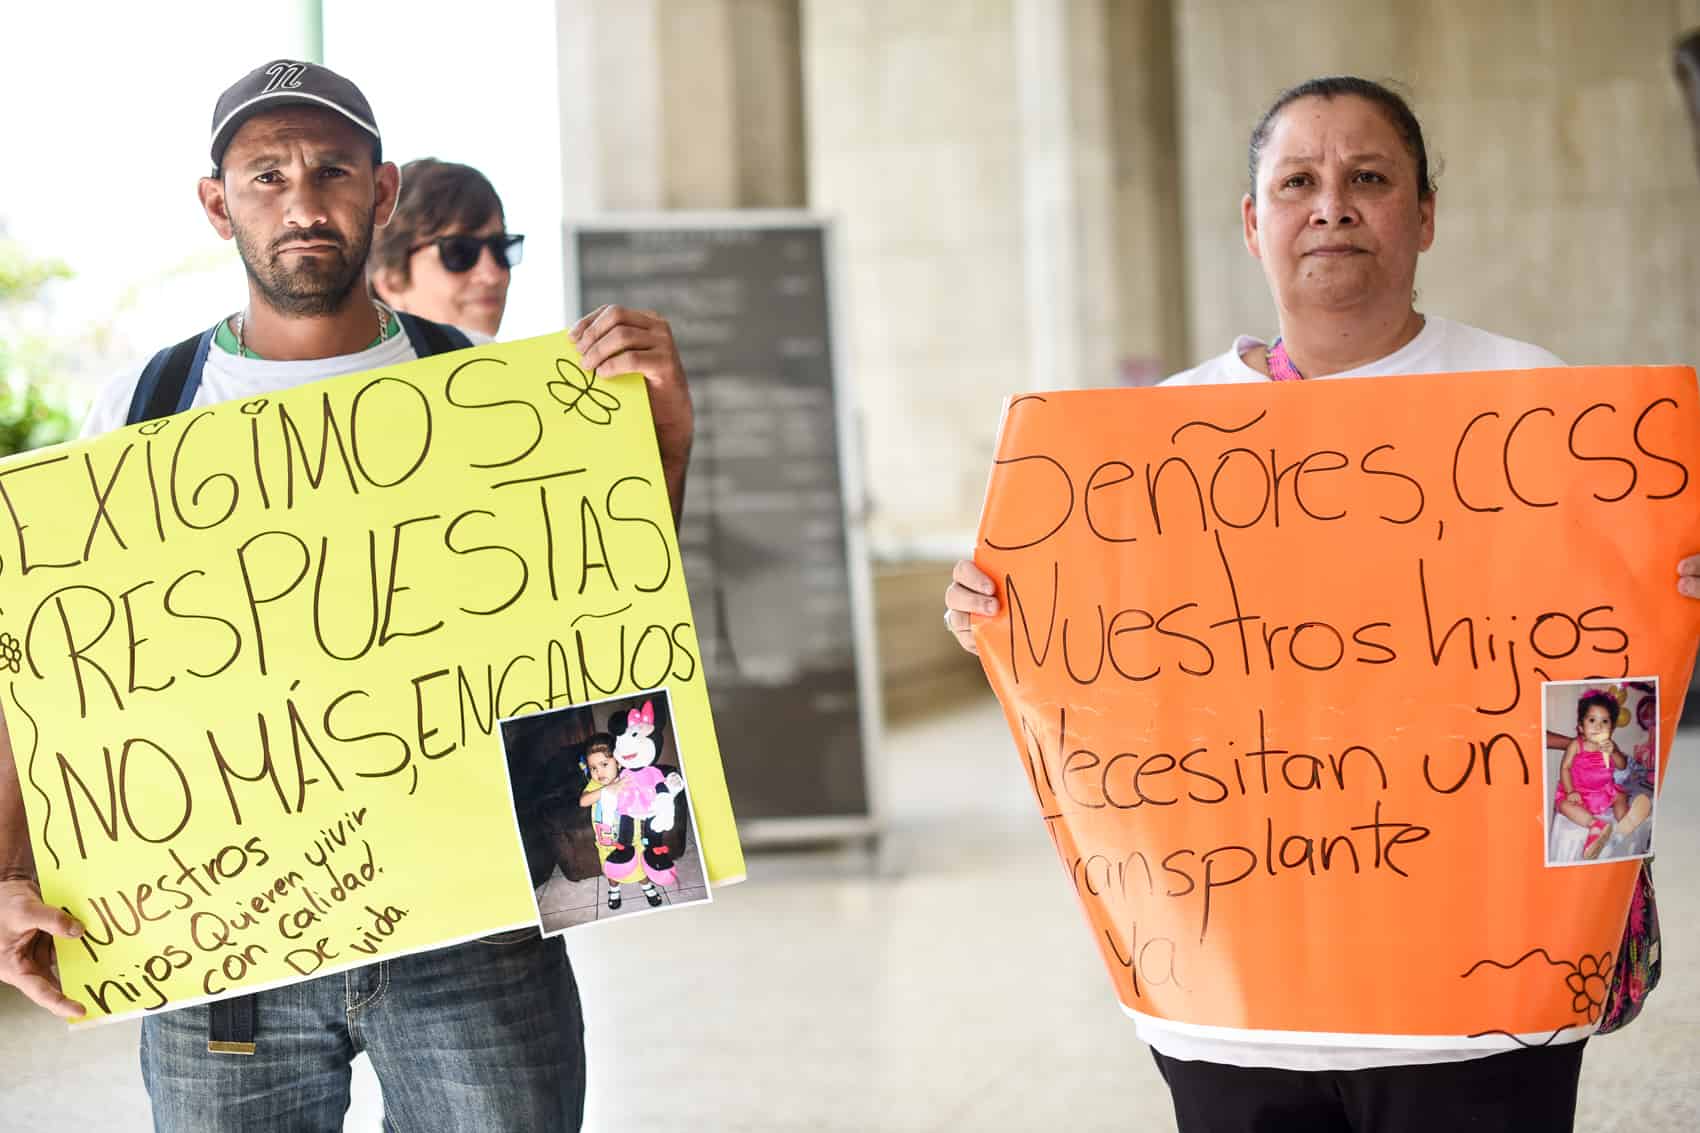 Parents of 6 children and members of the Asociación Nacional Segunda Oportunidad de Vida (ANASOVI) protested in front of the Social Security building in San José asking its leaders to reopen the liver transplant program at the Children's Hospital. The program was closed due to the lack of trained nurses to attend the surgeries about 3 years ago. 